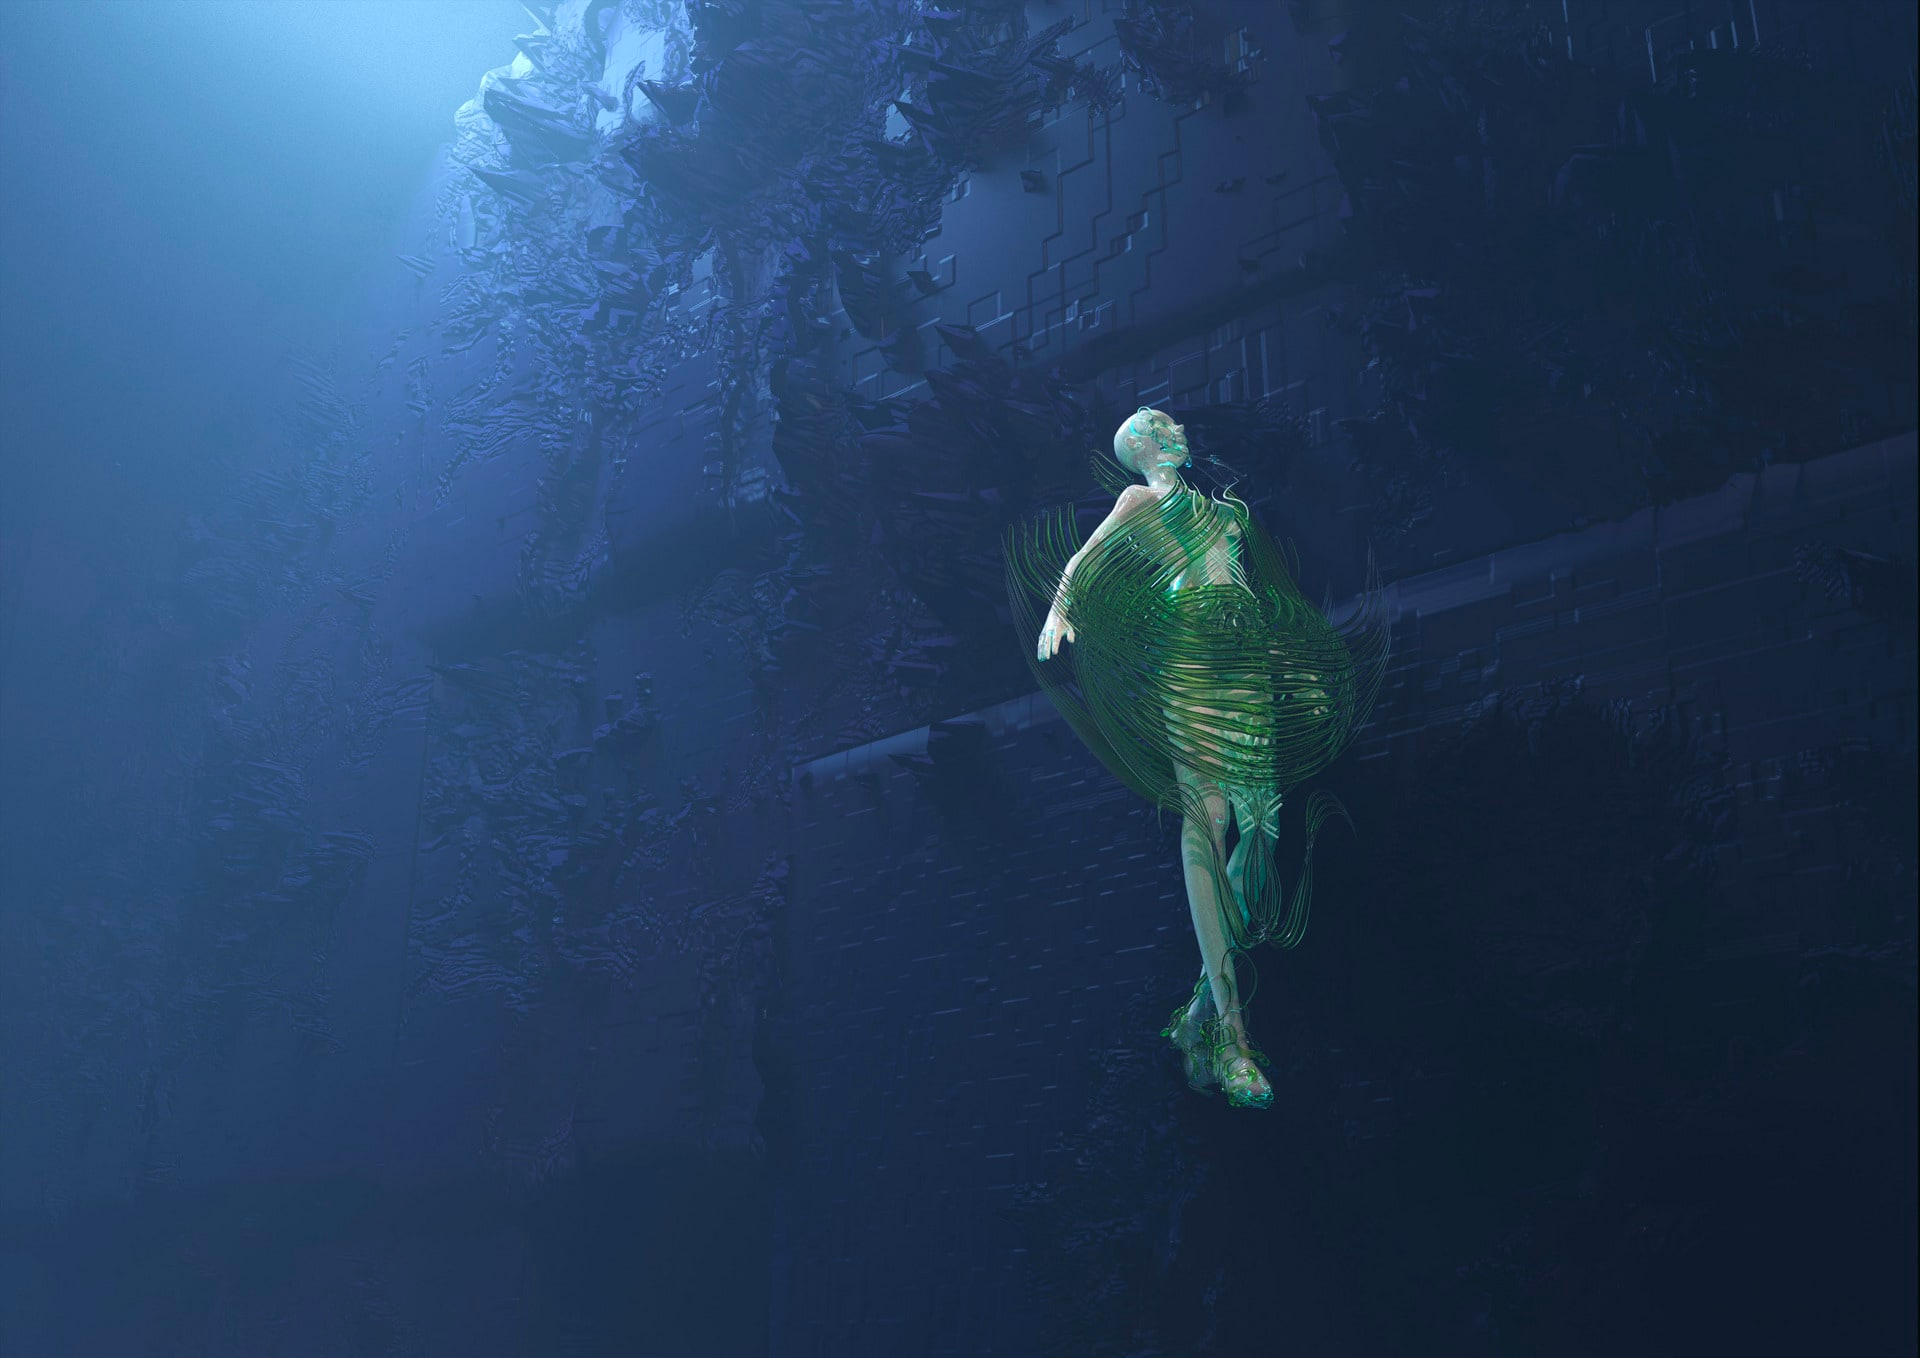 An image of a hairless, all-white female figure, loosely wrapped in a green net consisting of long strands and floating in what looks like deep ocean, next to a large, crumbling deep blue structure.